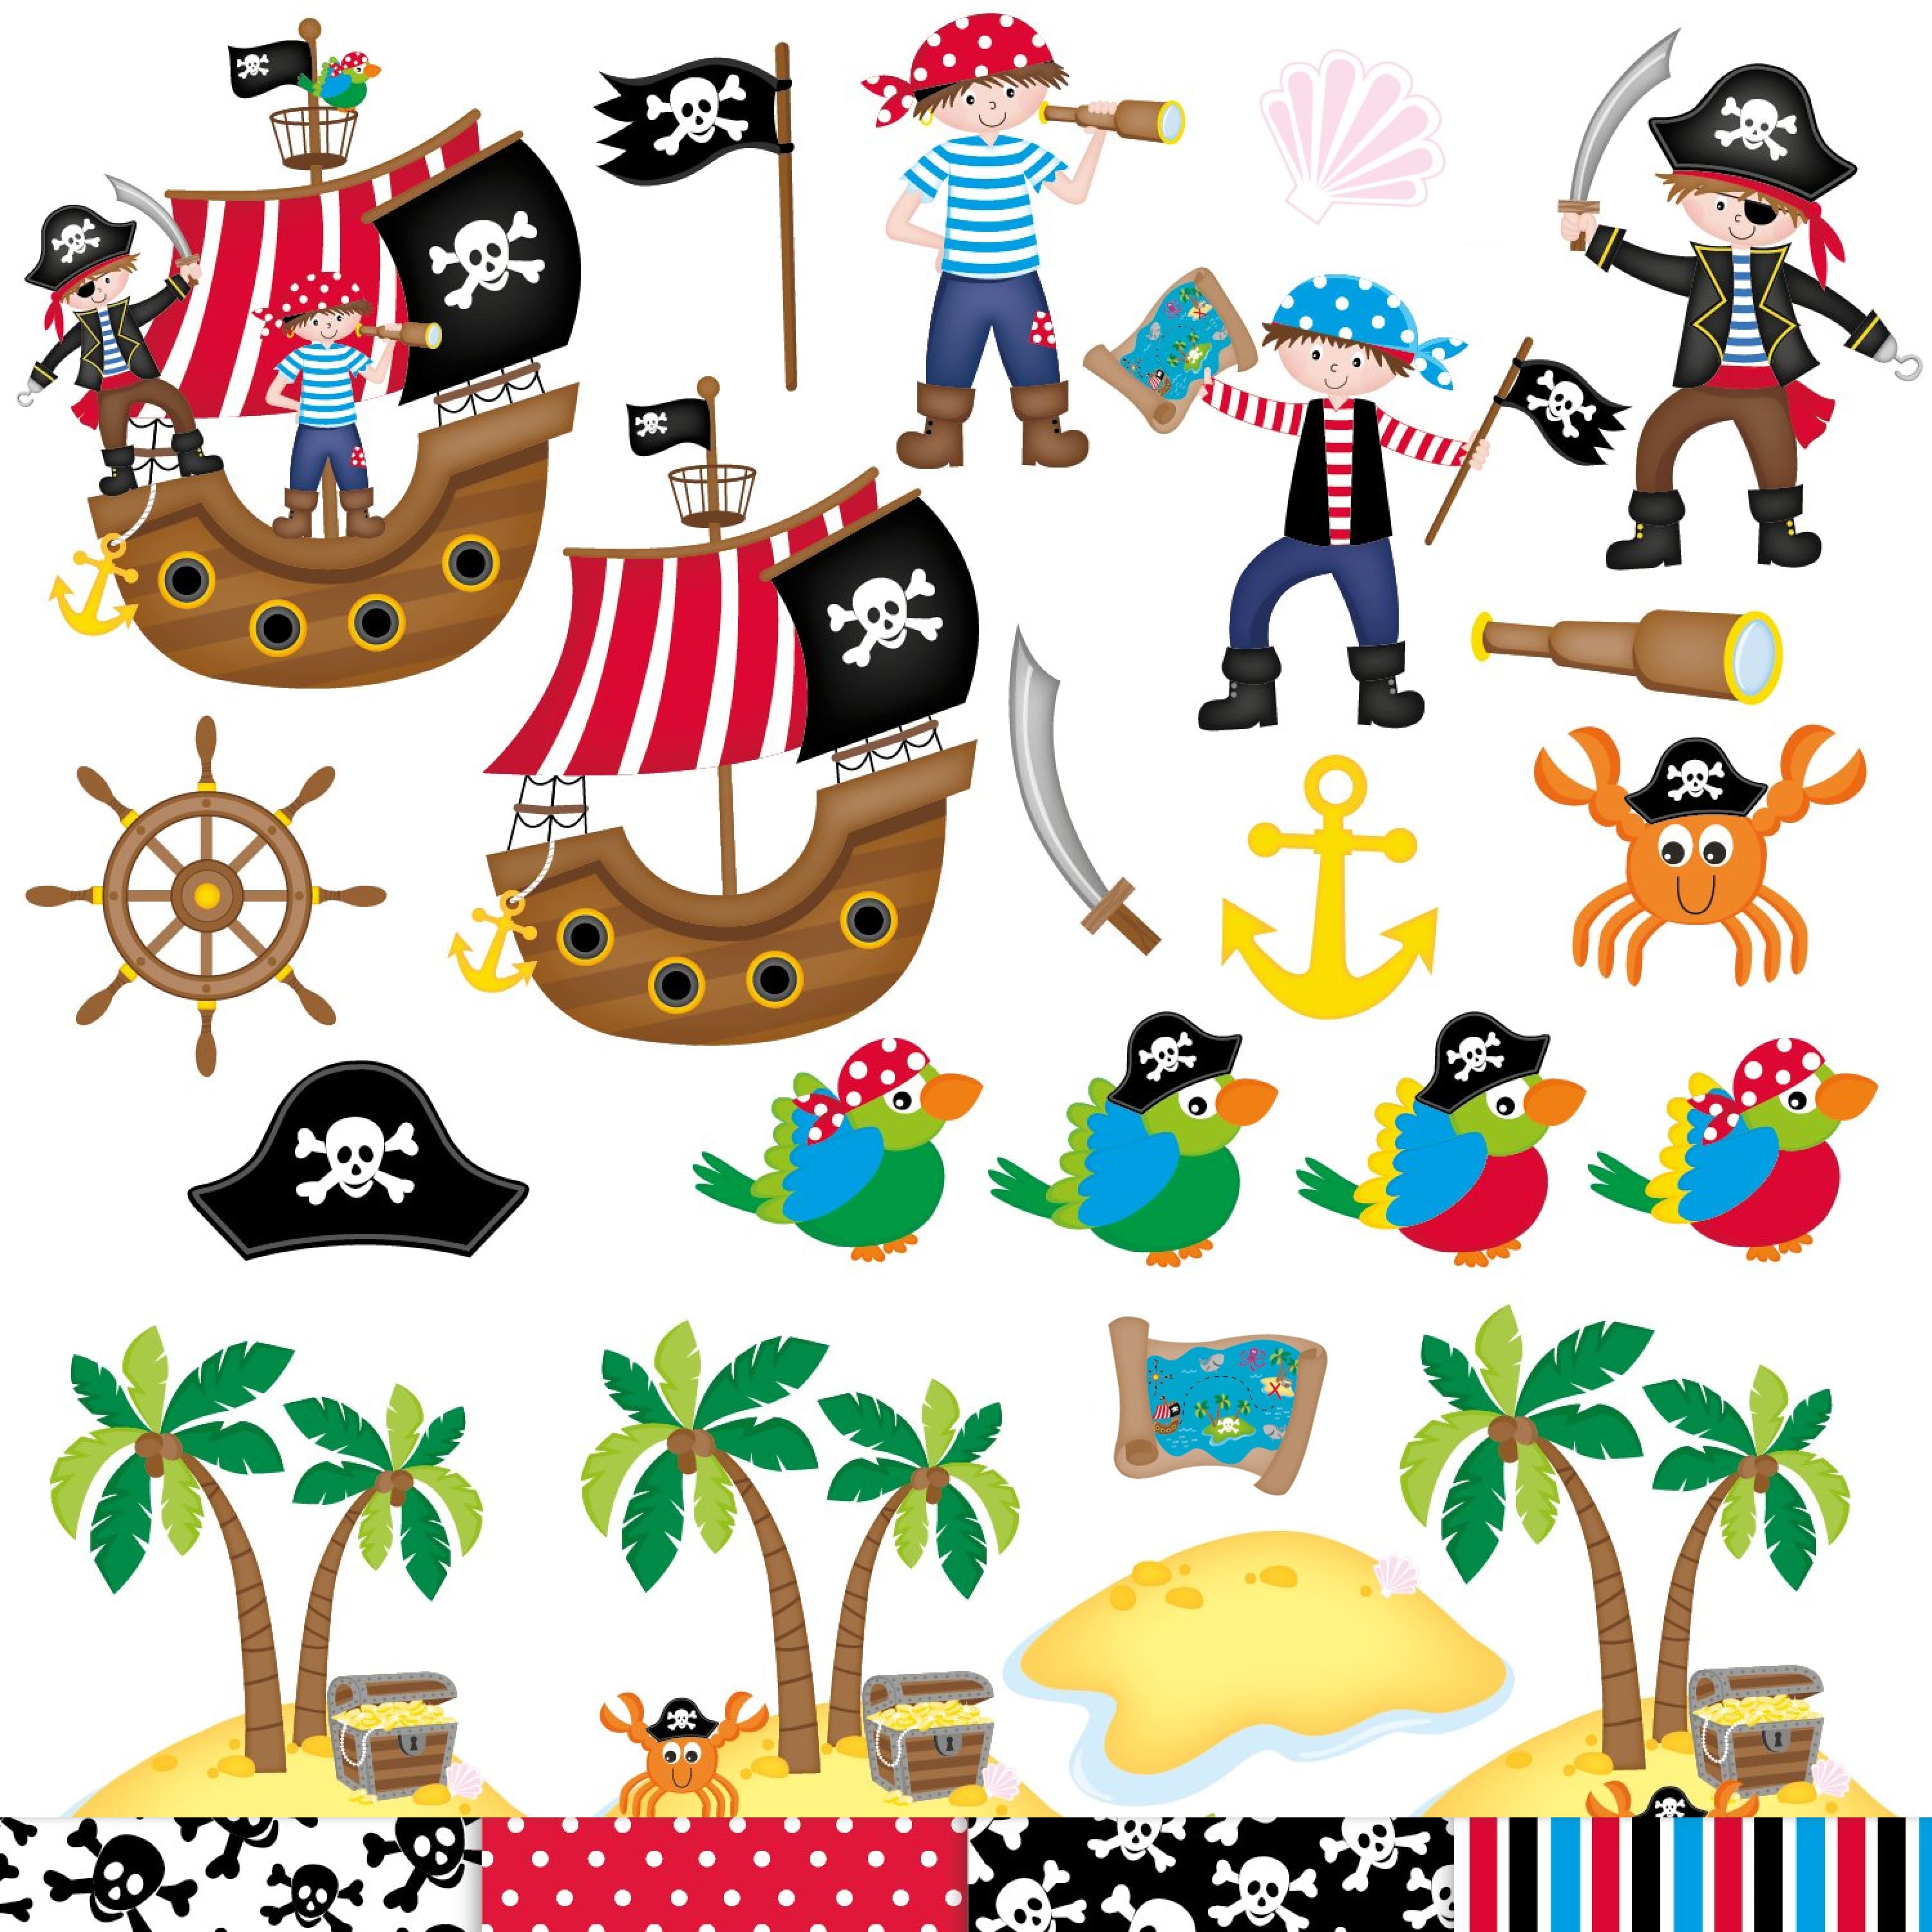 Pirate clipart, Pirate graphics & illustrations, Pirate ship cover.